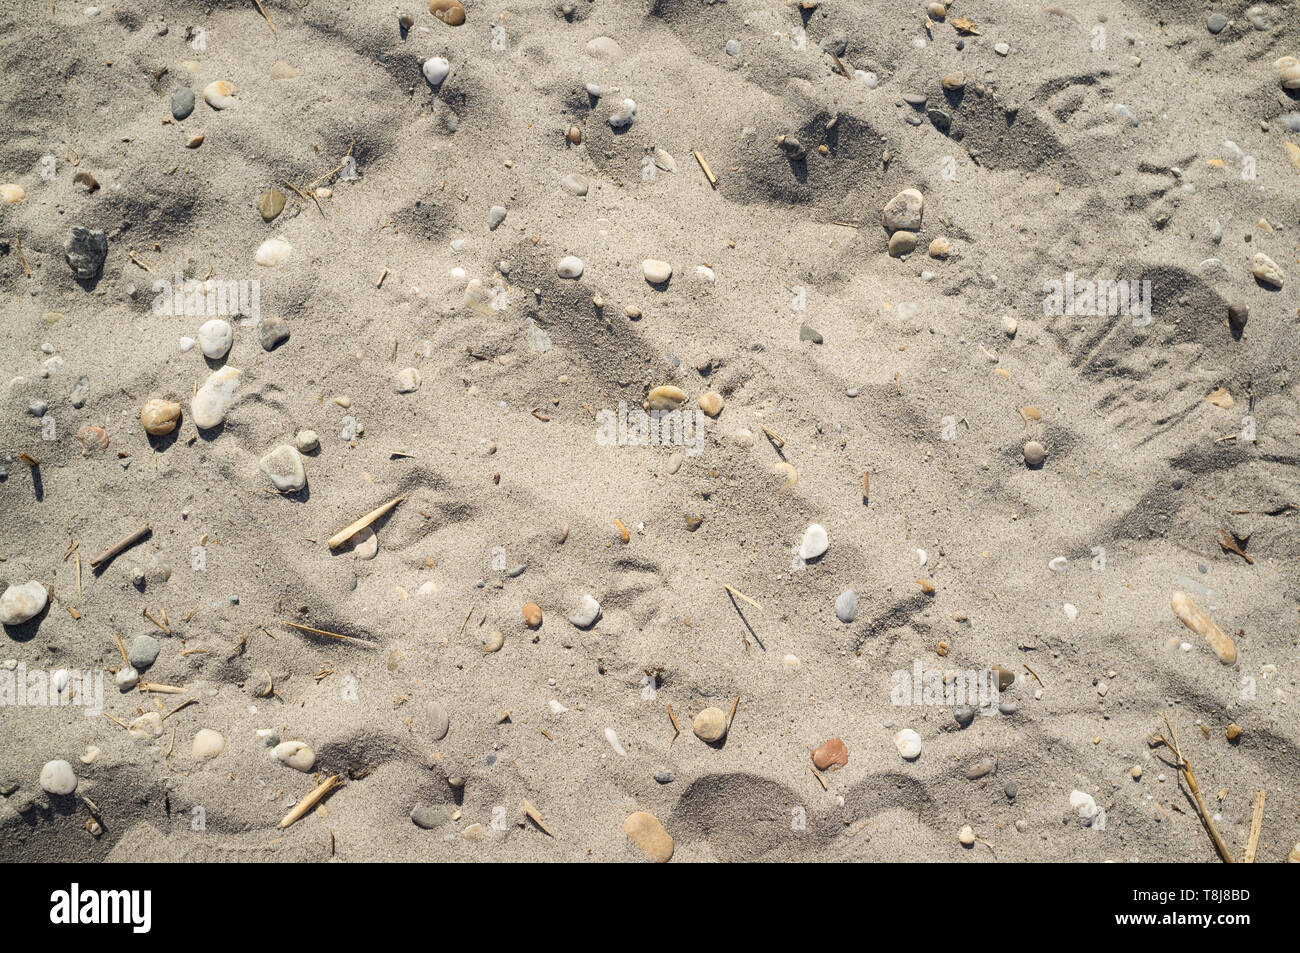 Texture of Lakeside Sand with Small Stones Pieces of Wood and Human Footprints Stock Photo